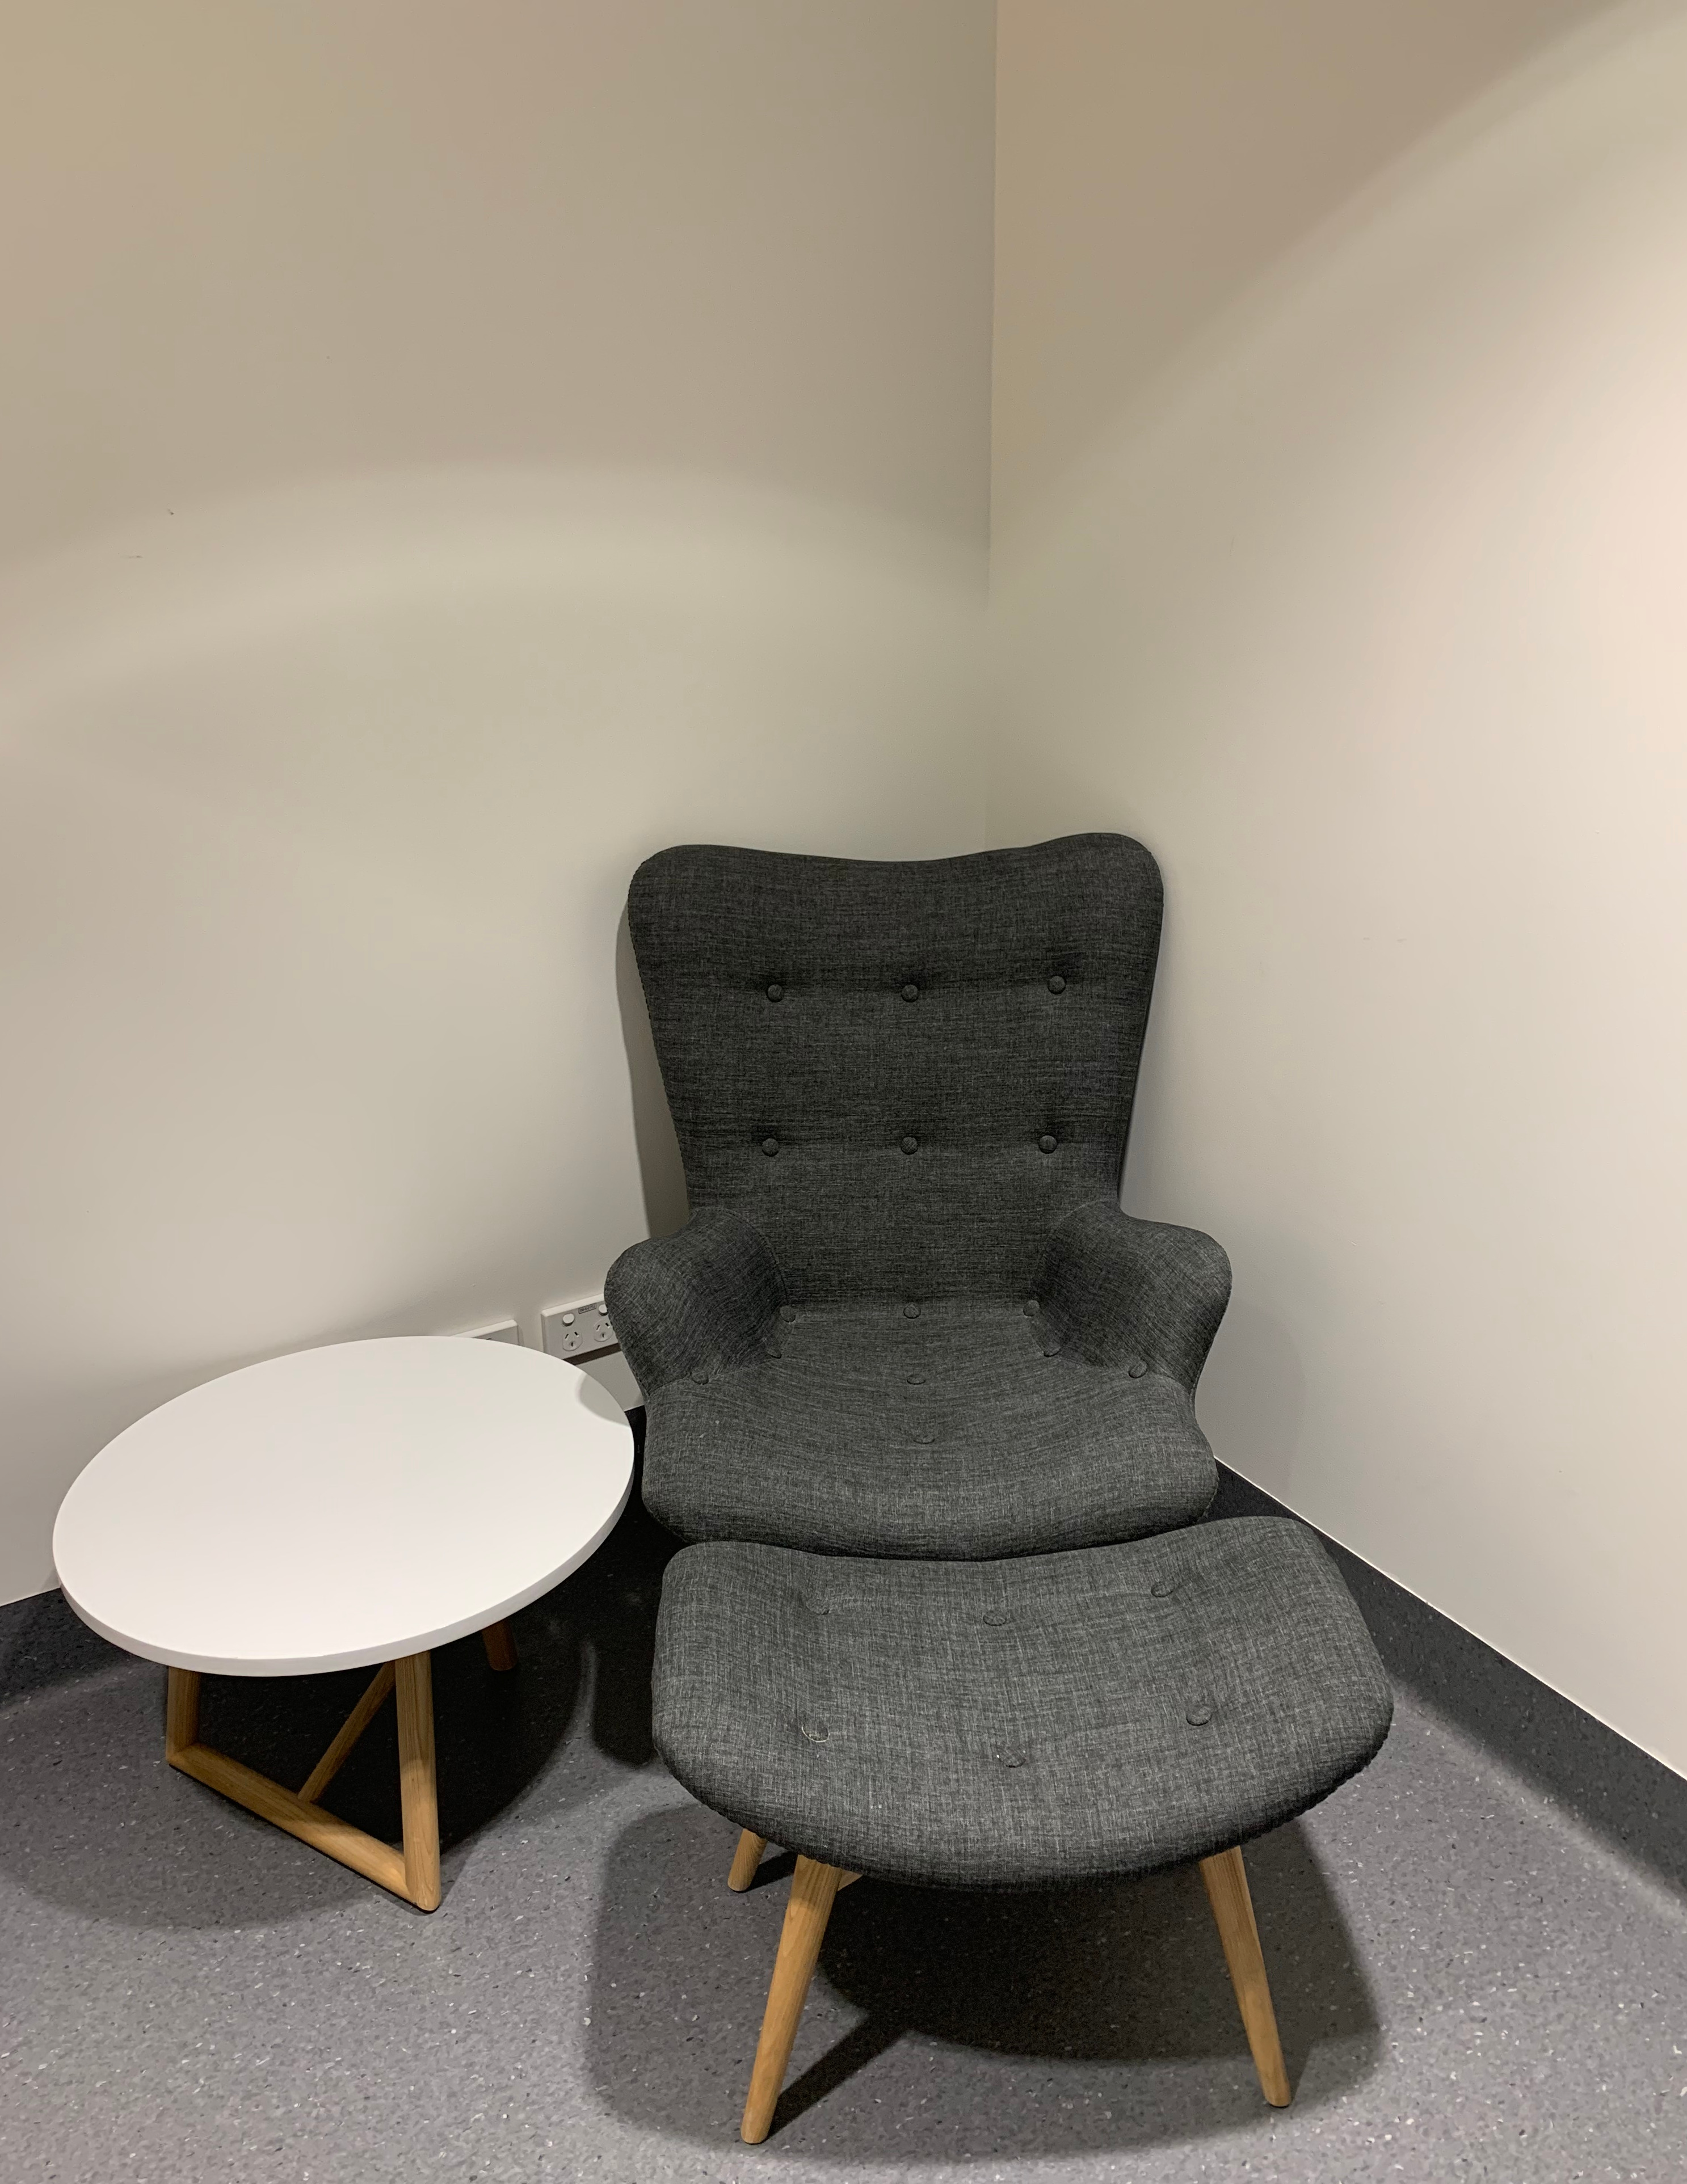 Our parenting rooms have purpose-built chairs and footstools for comfortable breastfeeding.